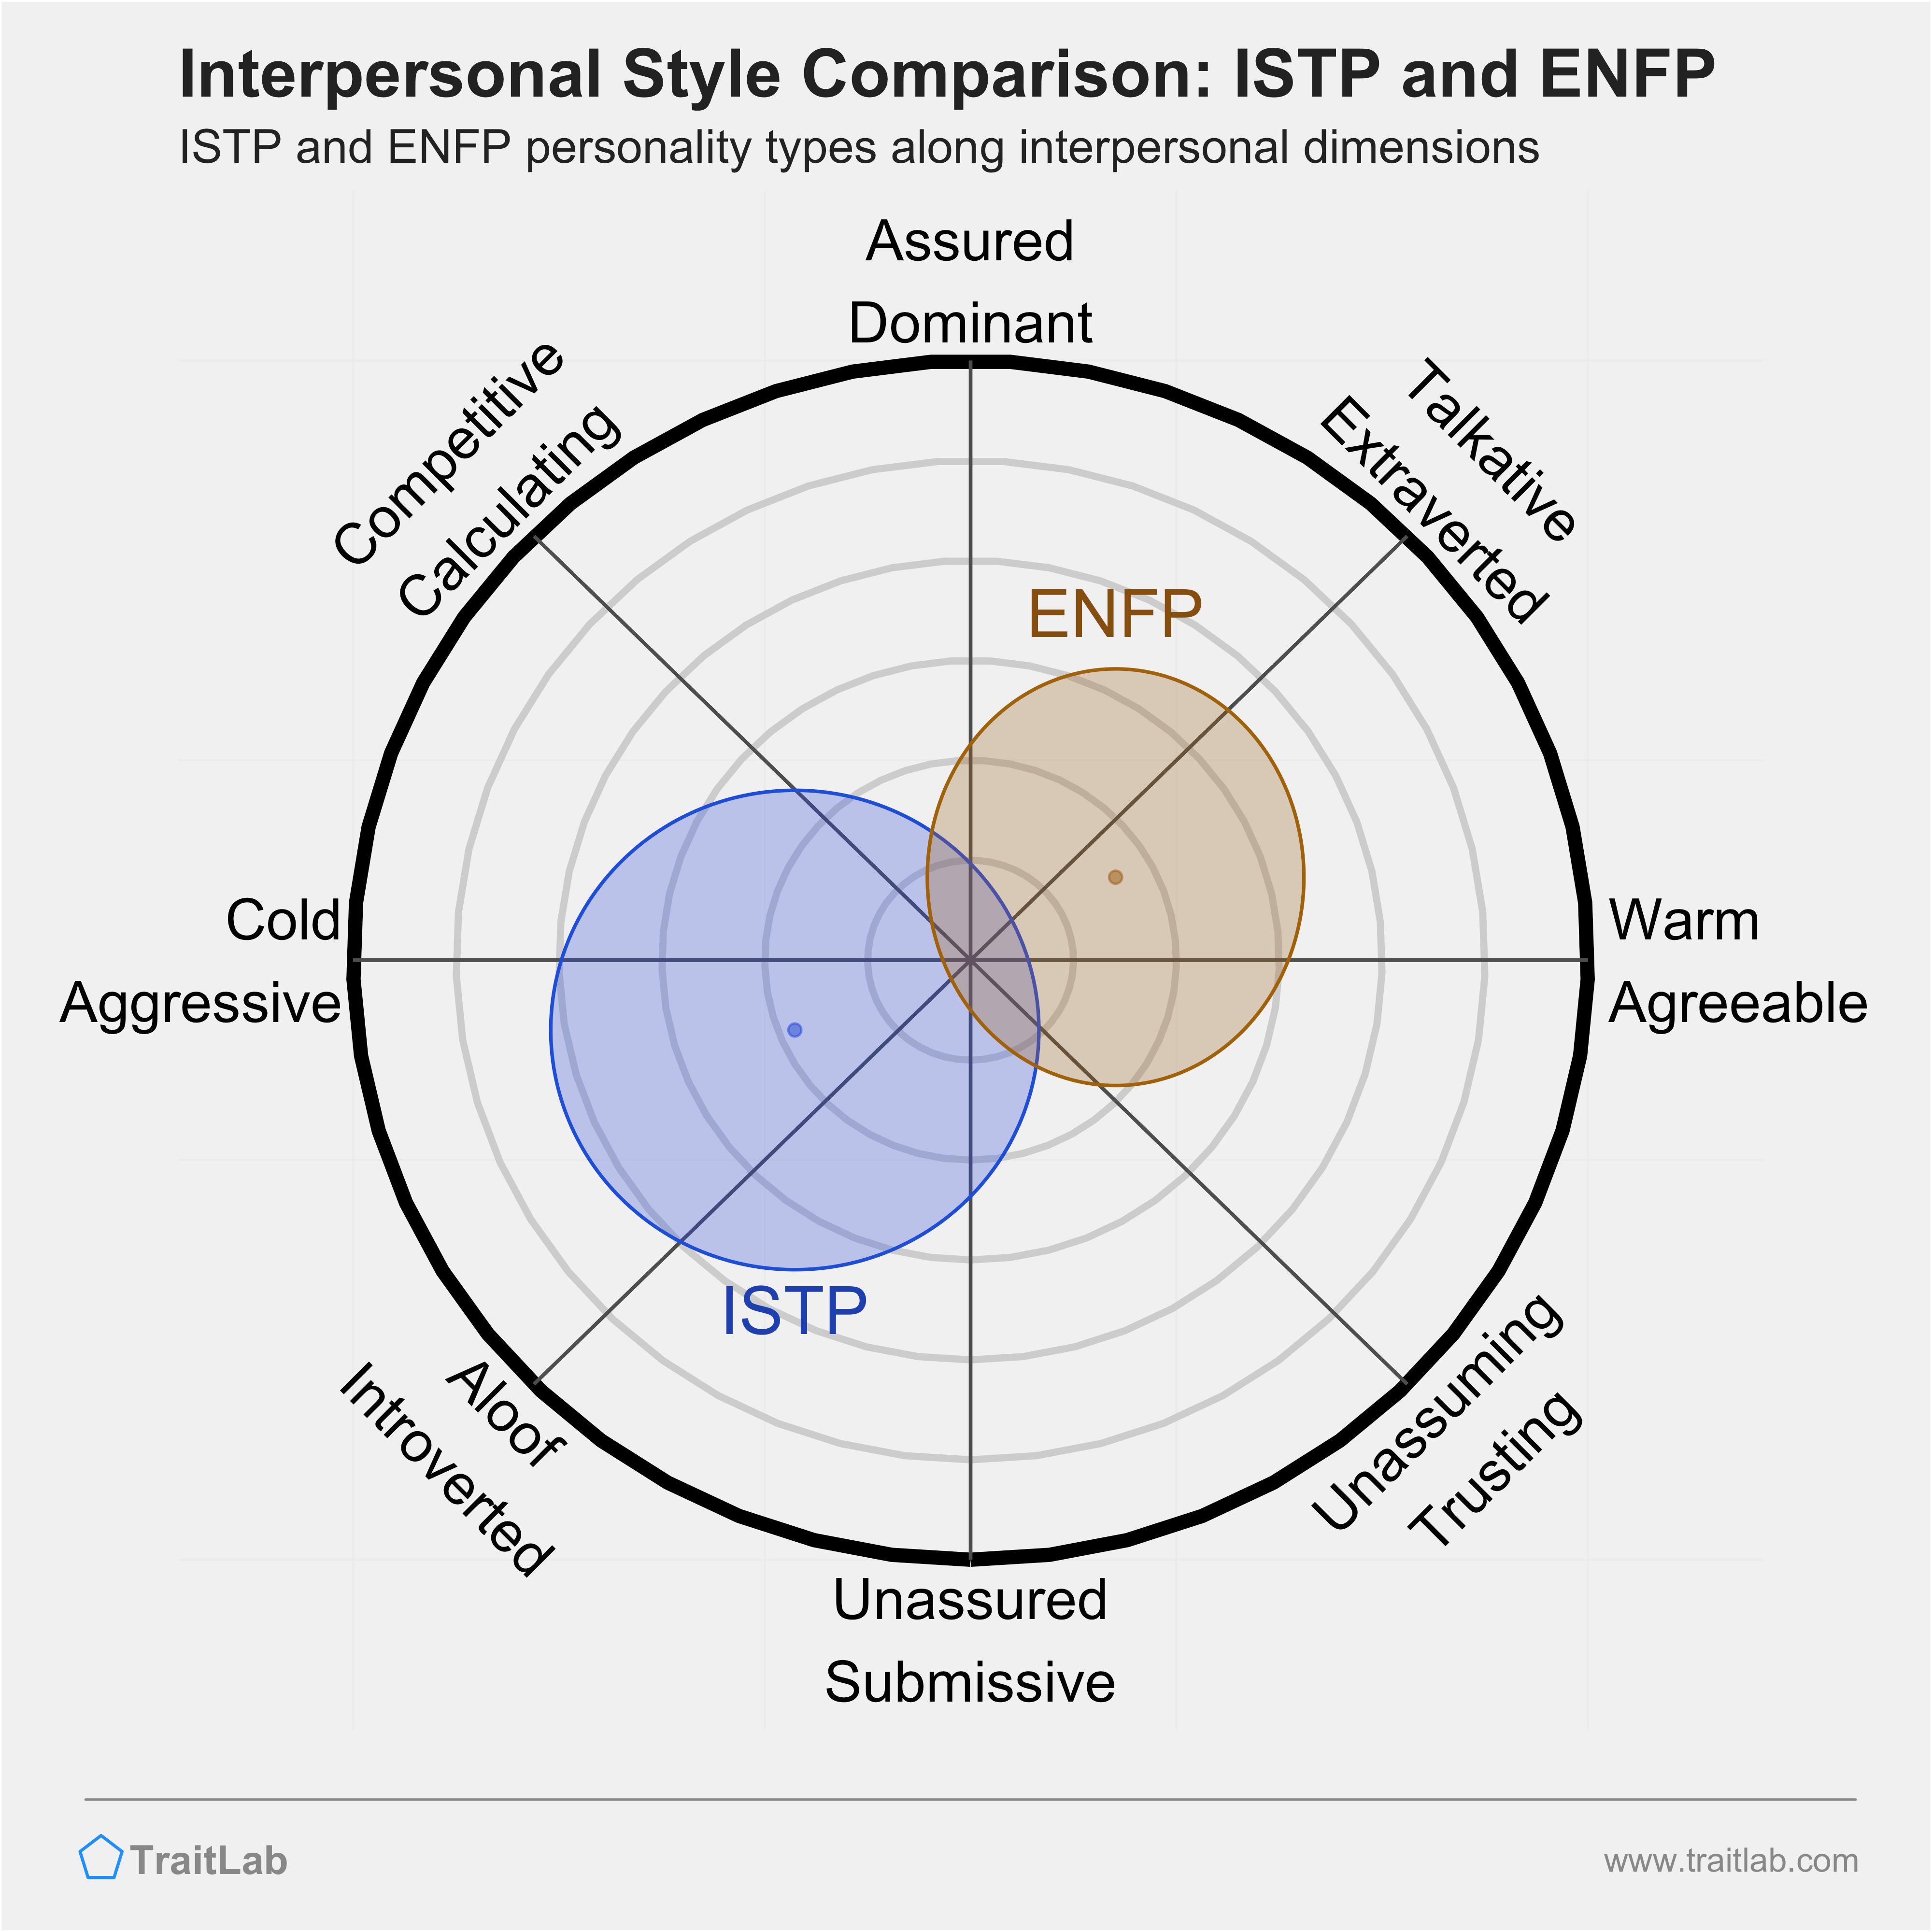 ISTP and ENFP comparison across interpersonal dimensions